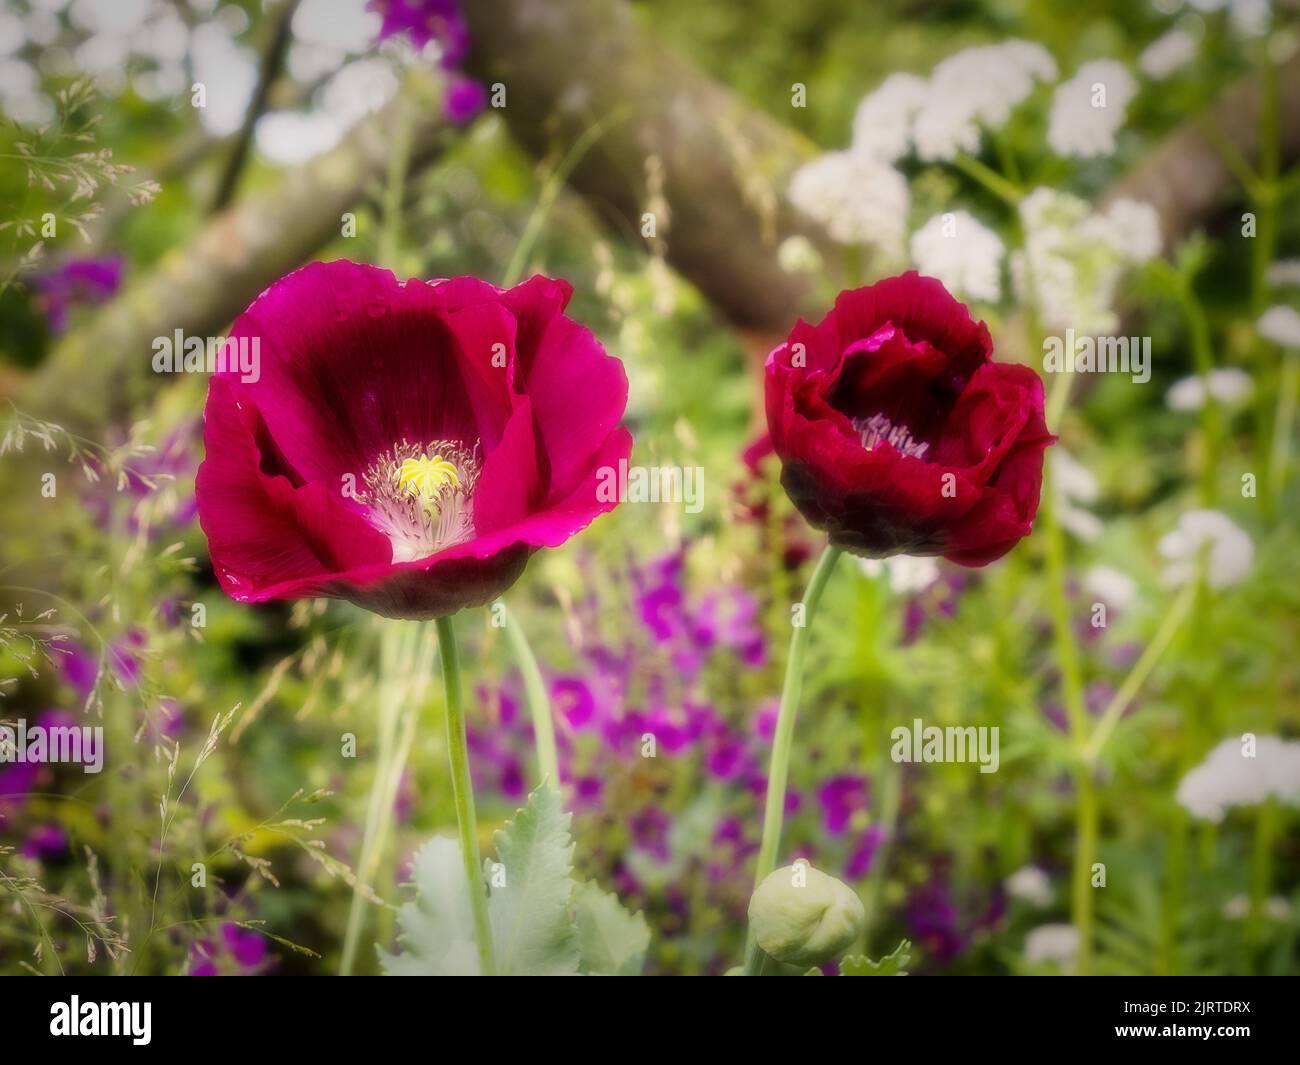 Two poppies in soft at the Chelsea Flower Show in London. Stock Photo